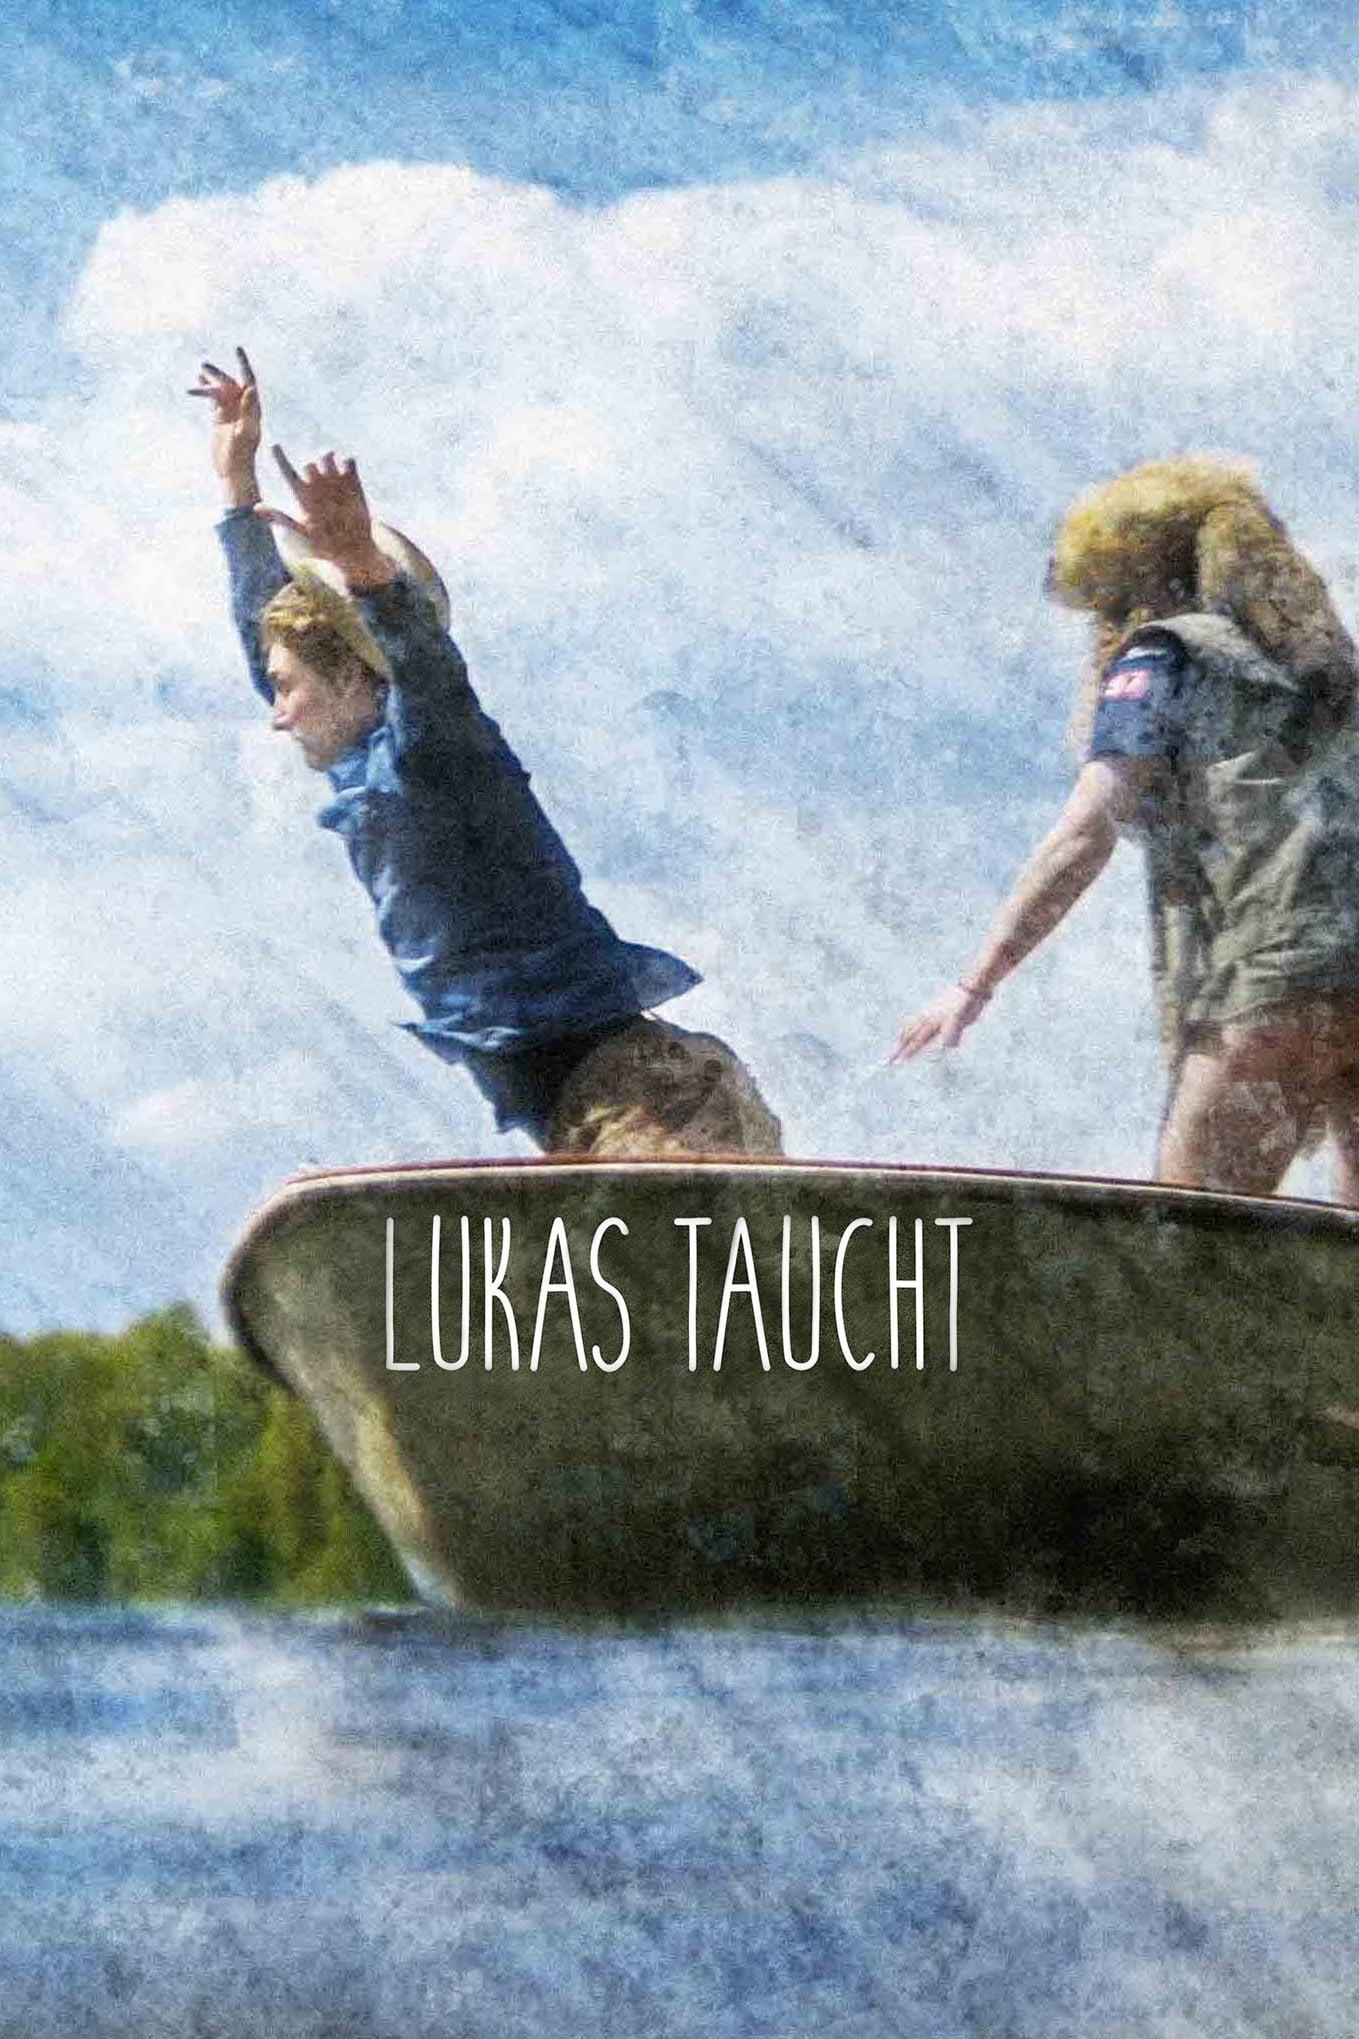 Lukas taucht poster